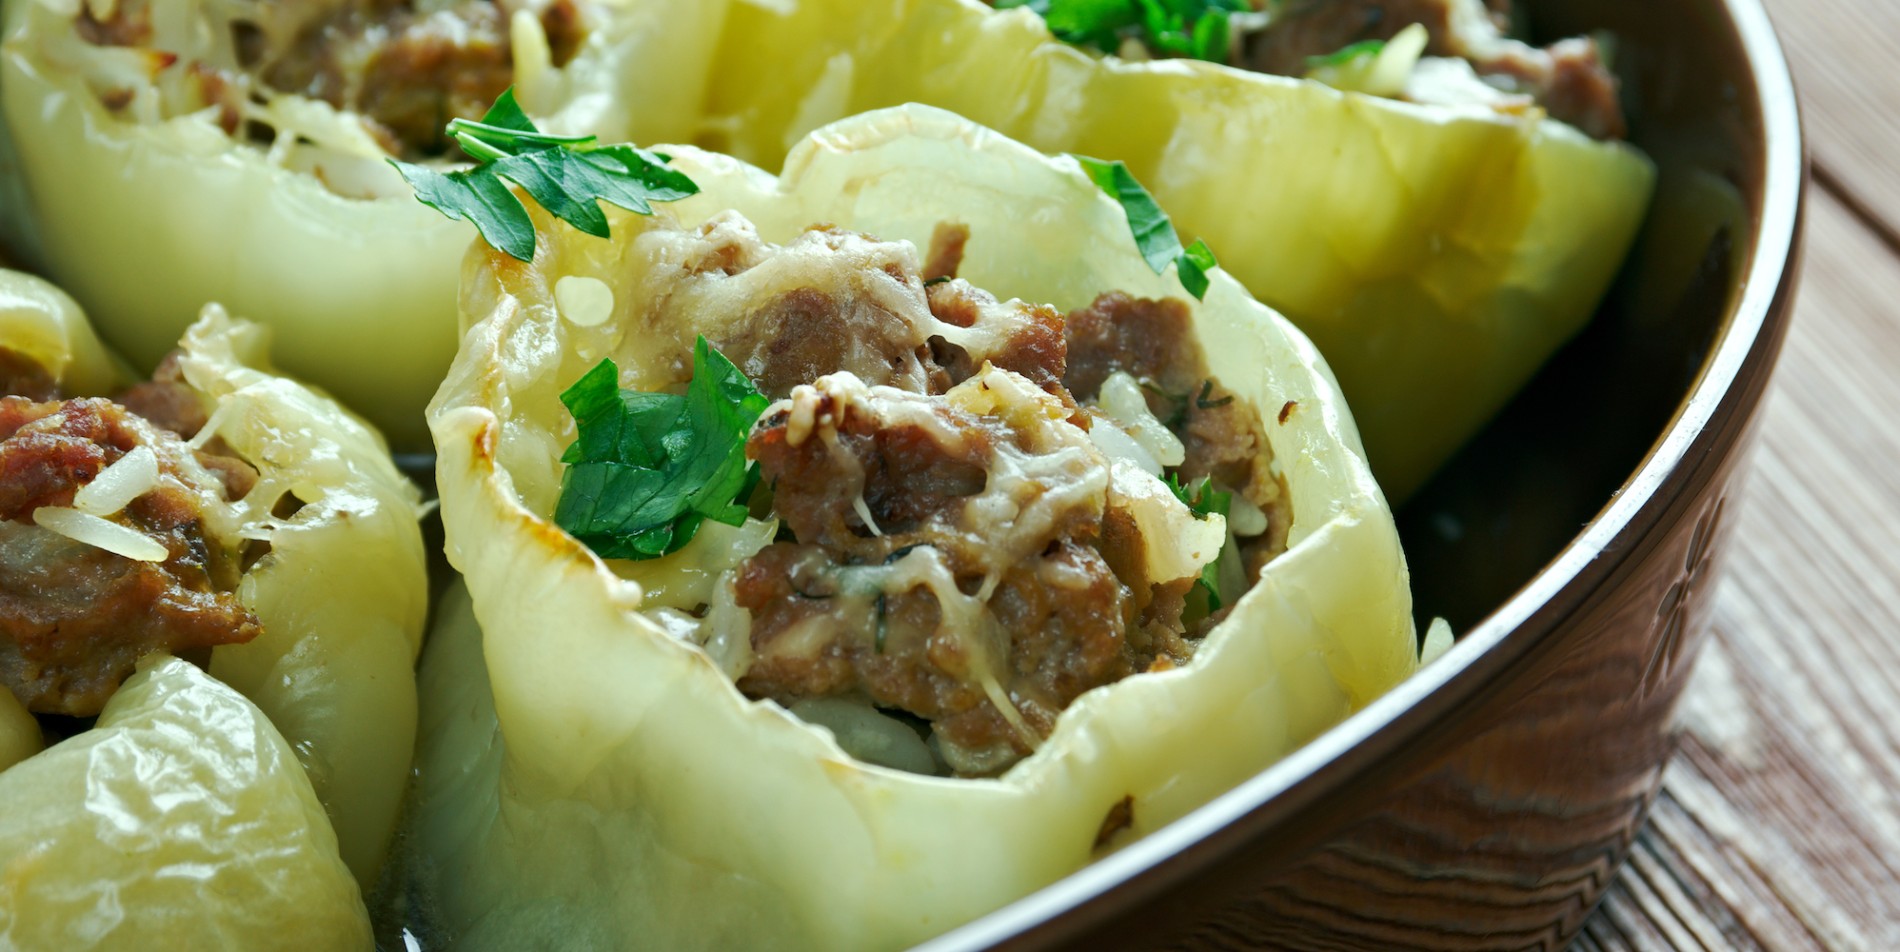 Traditional Croatian stuffed yellow peppers topped with paprika and cheese